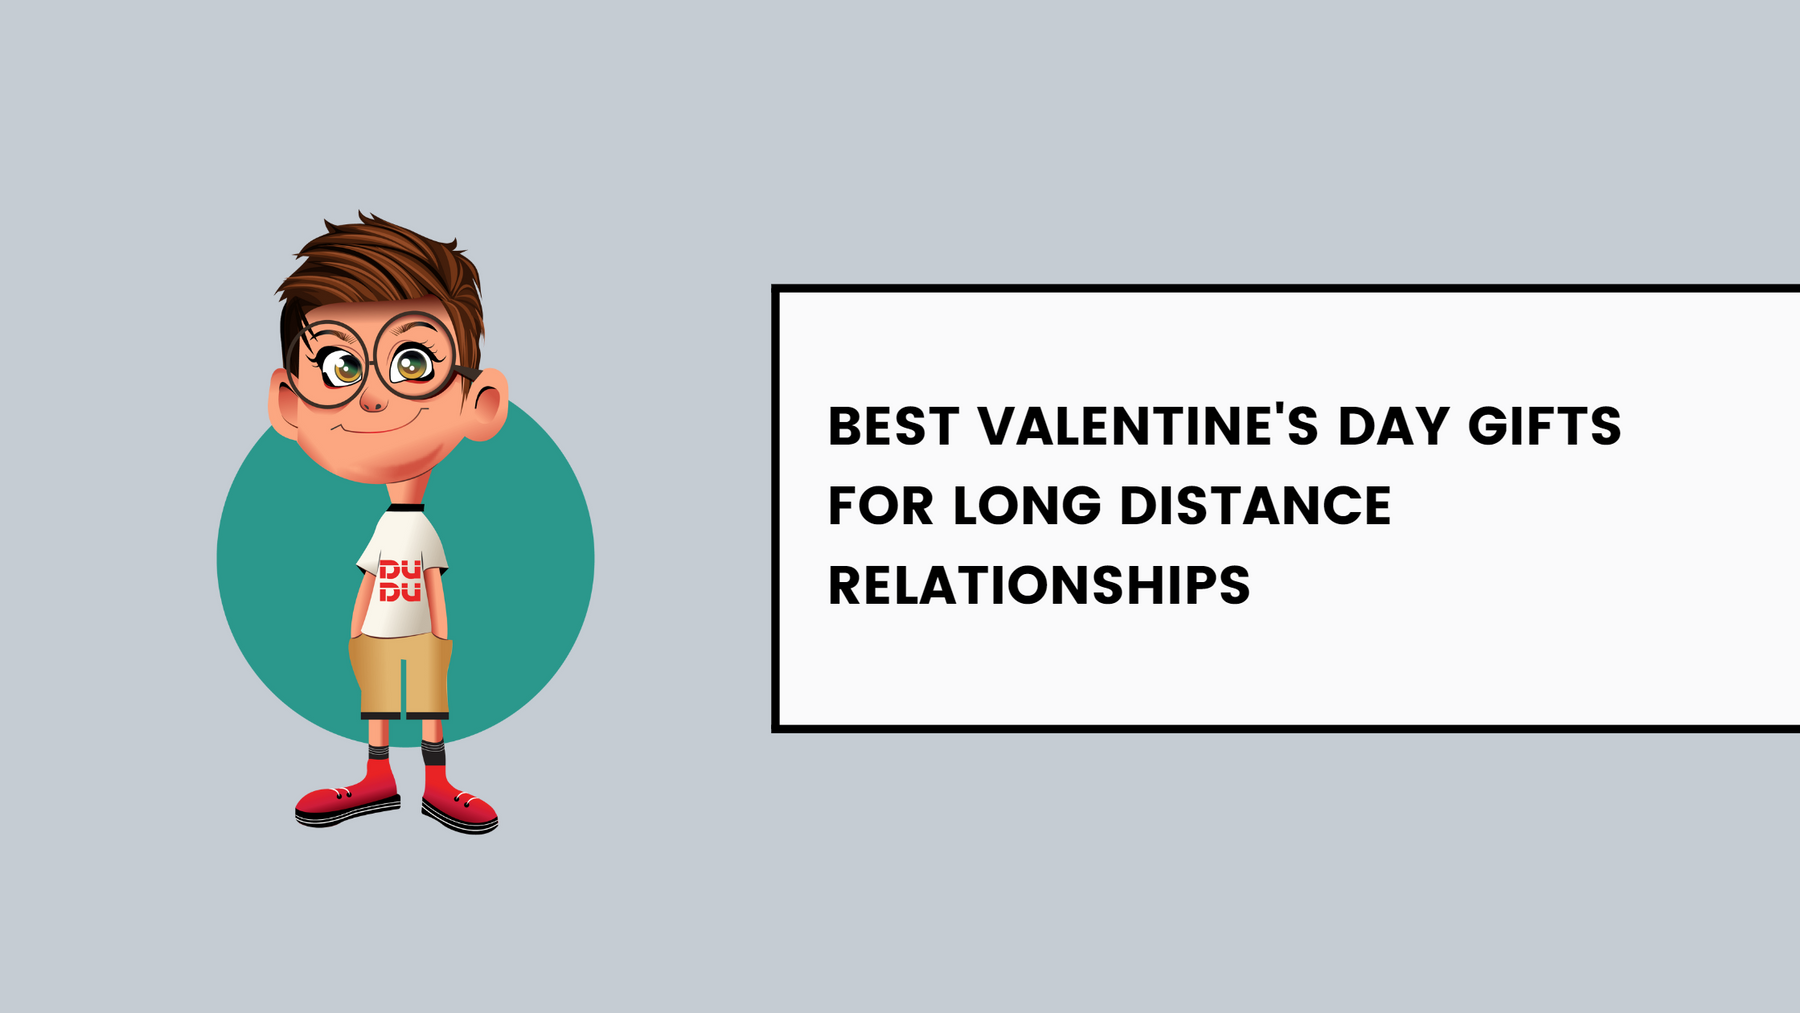 Best Valentine's Day Gifts for Long Distance Relationships